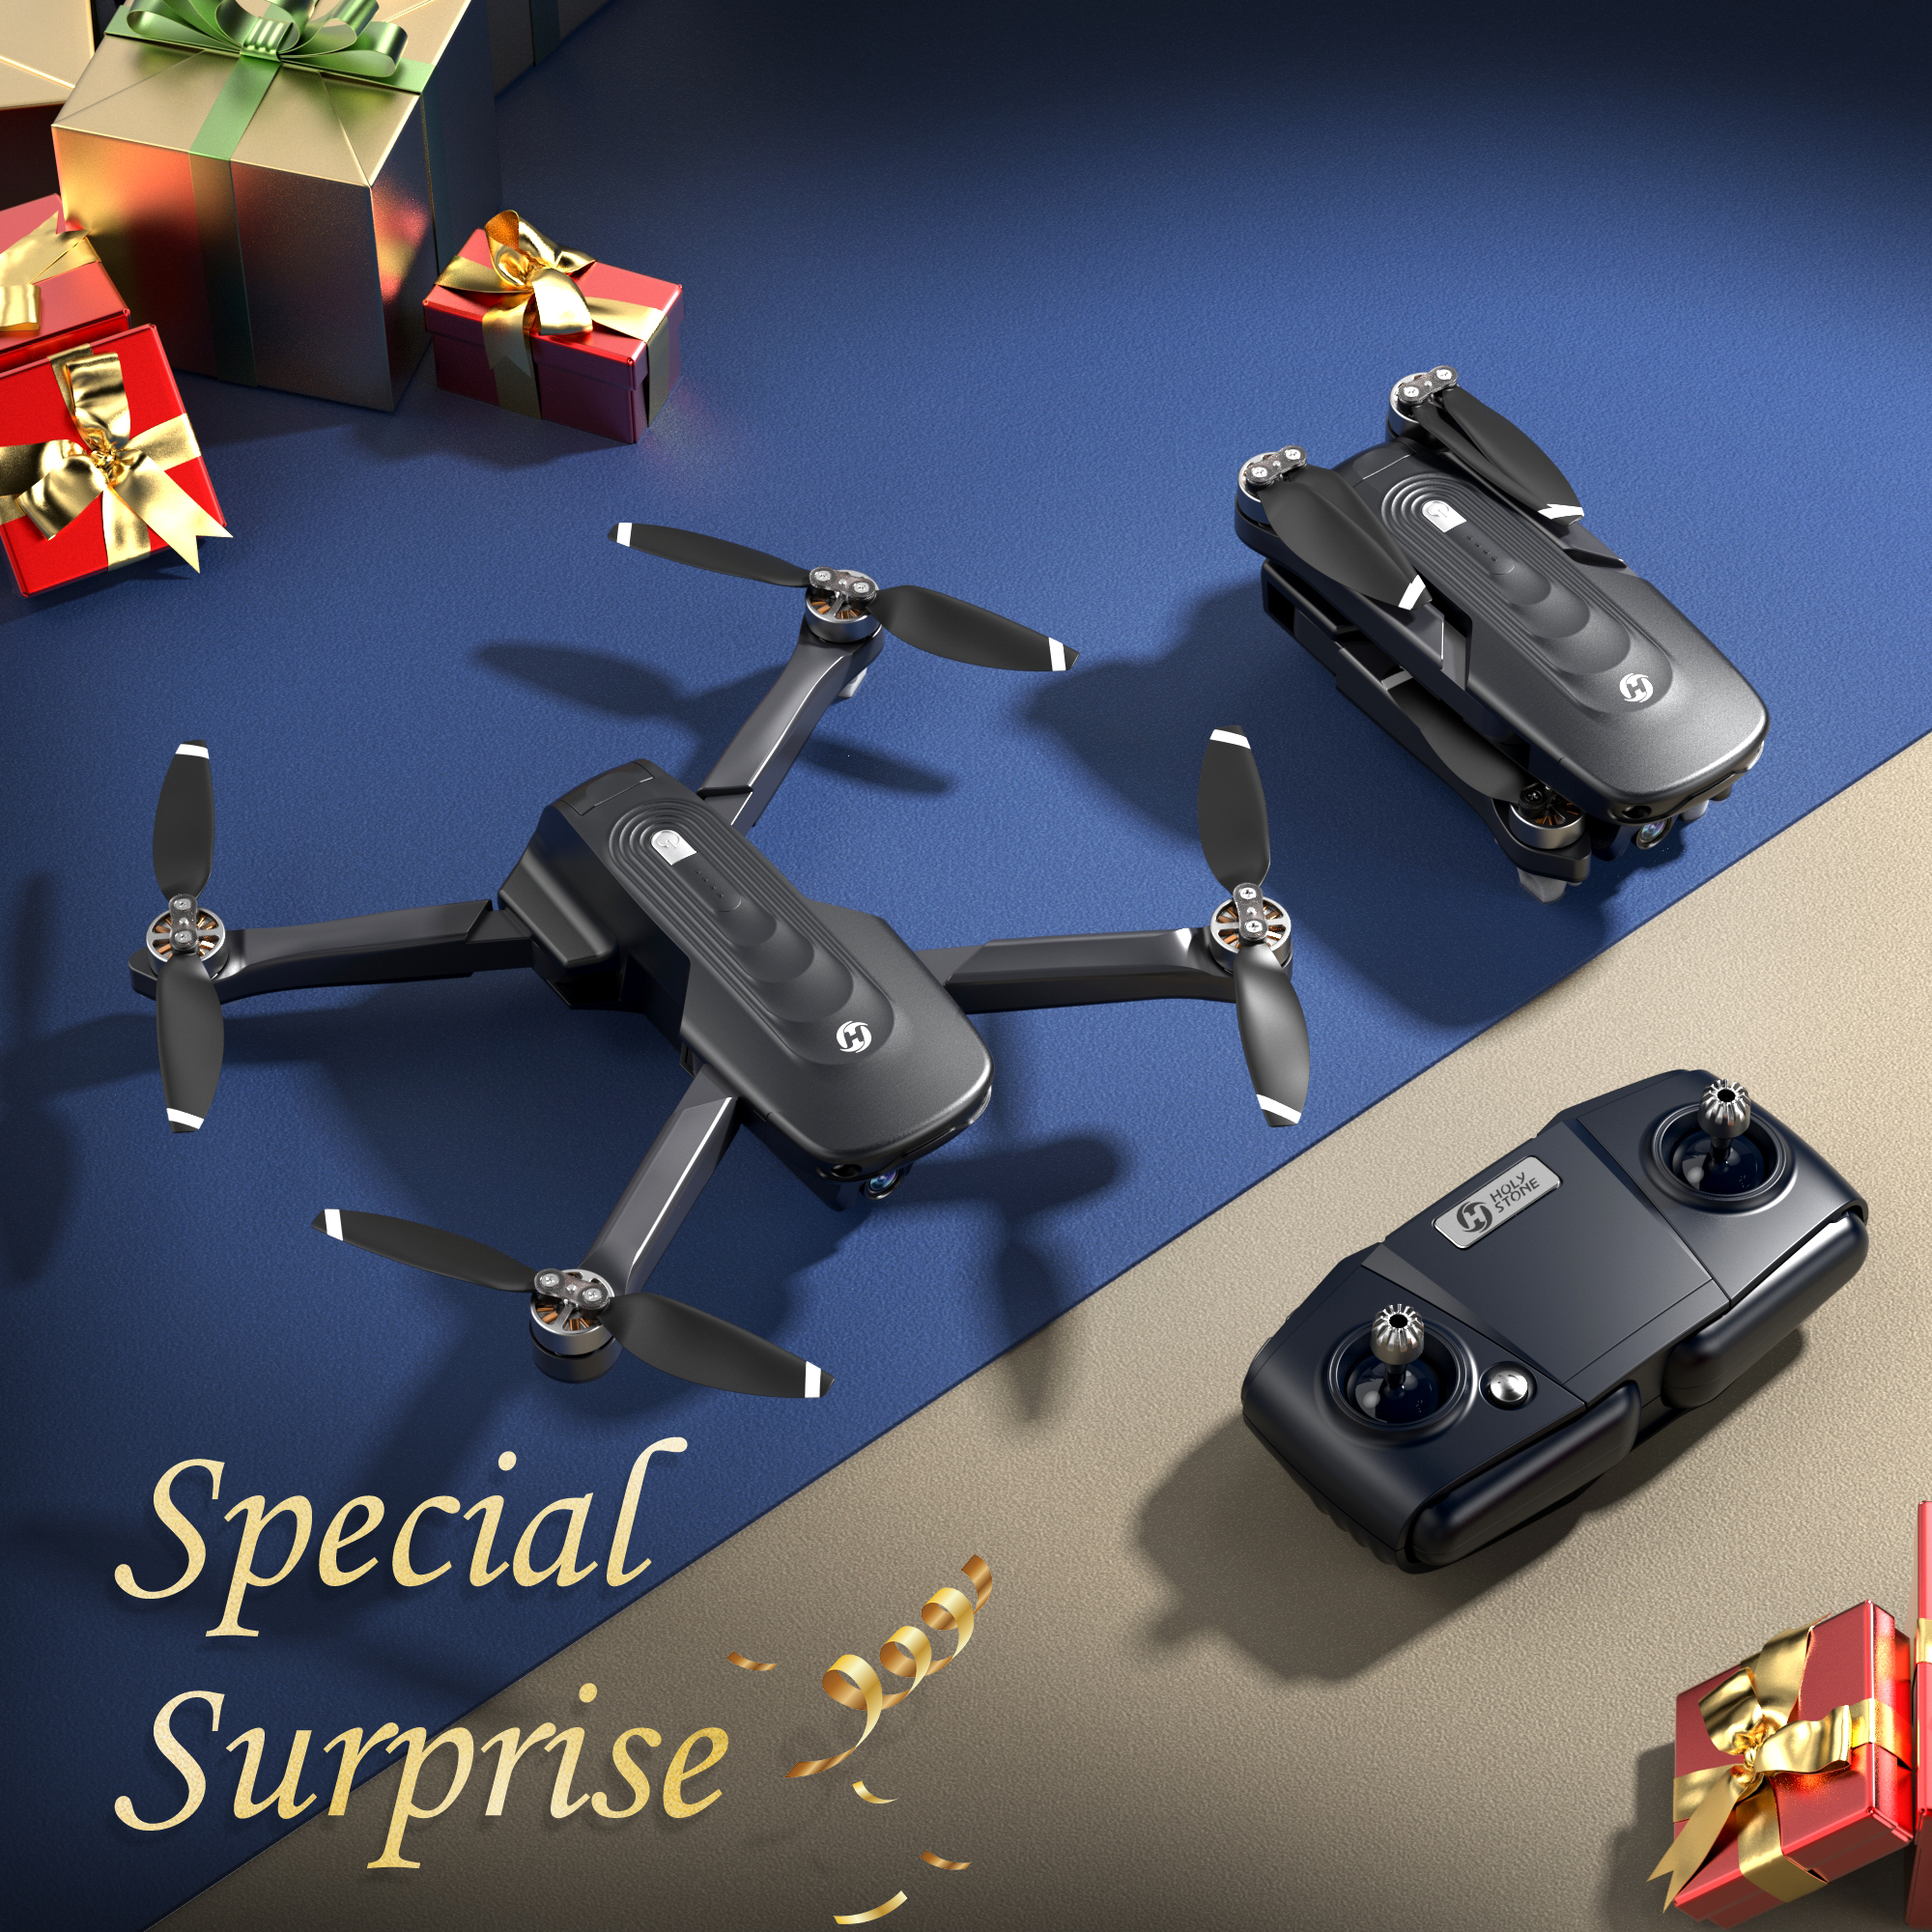 Holy Stone Drone HS175D with 4K Camera for Adults and Beginners, Foldable GPS Drone with Auto Return Home, Follow Me Mode, 2 Batteries Double the Flight Time, Black - image 3 of 8